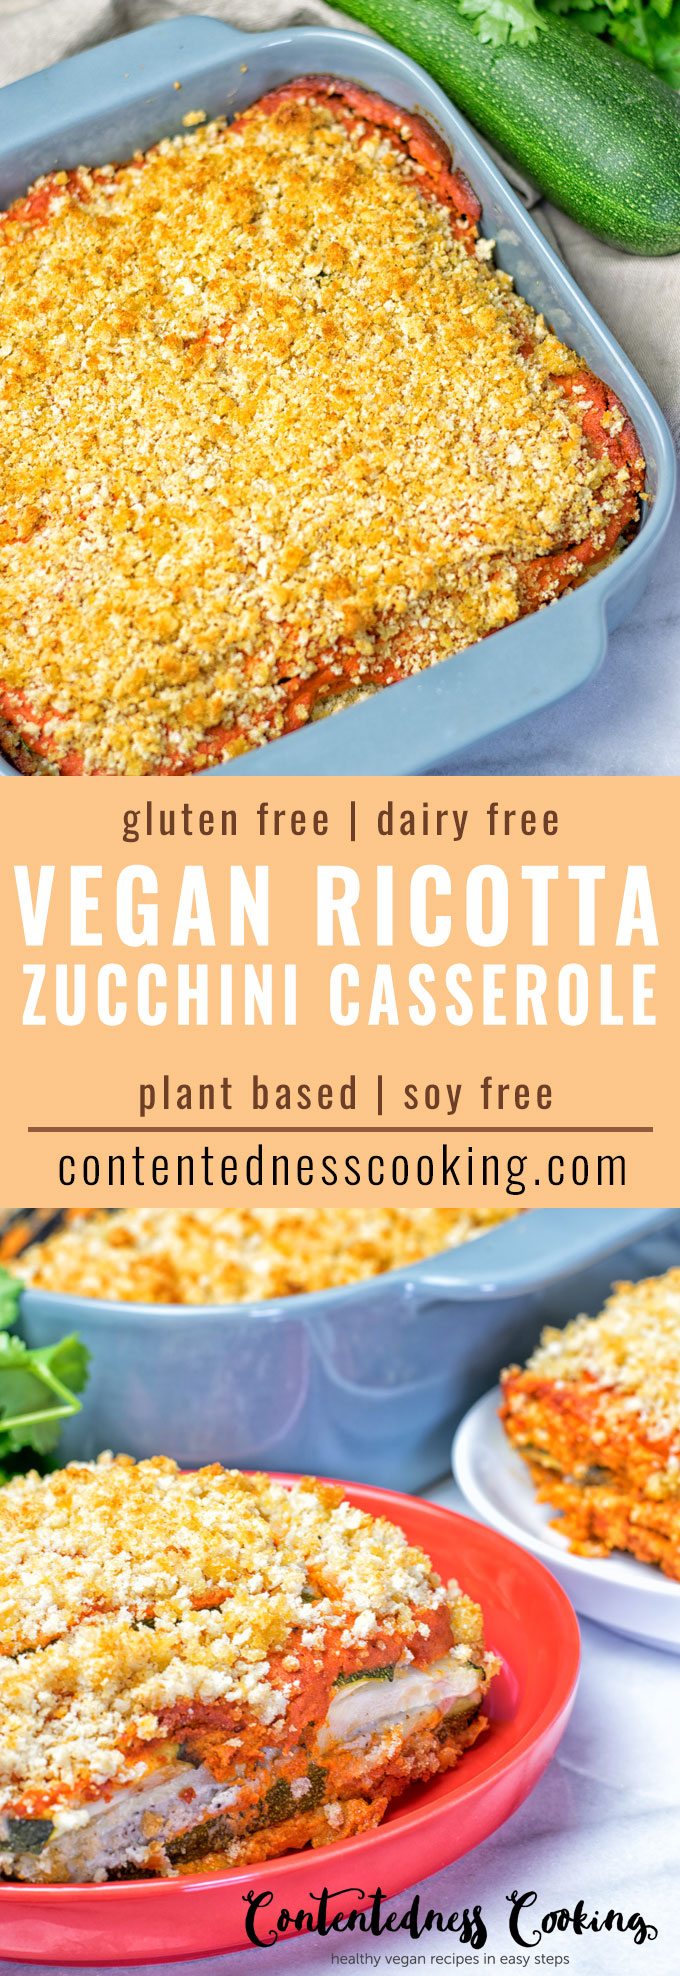 Collage of two pictures of the Vegan Ricotta Zucchini Casserole with recipe title text.